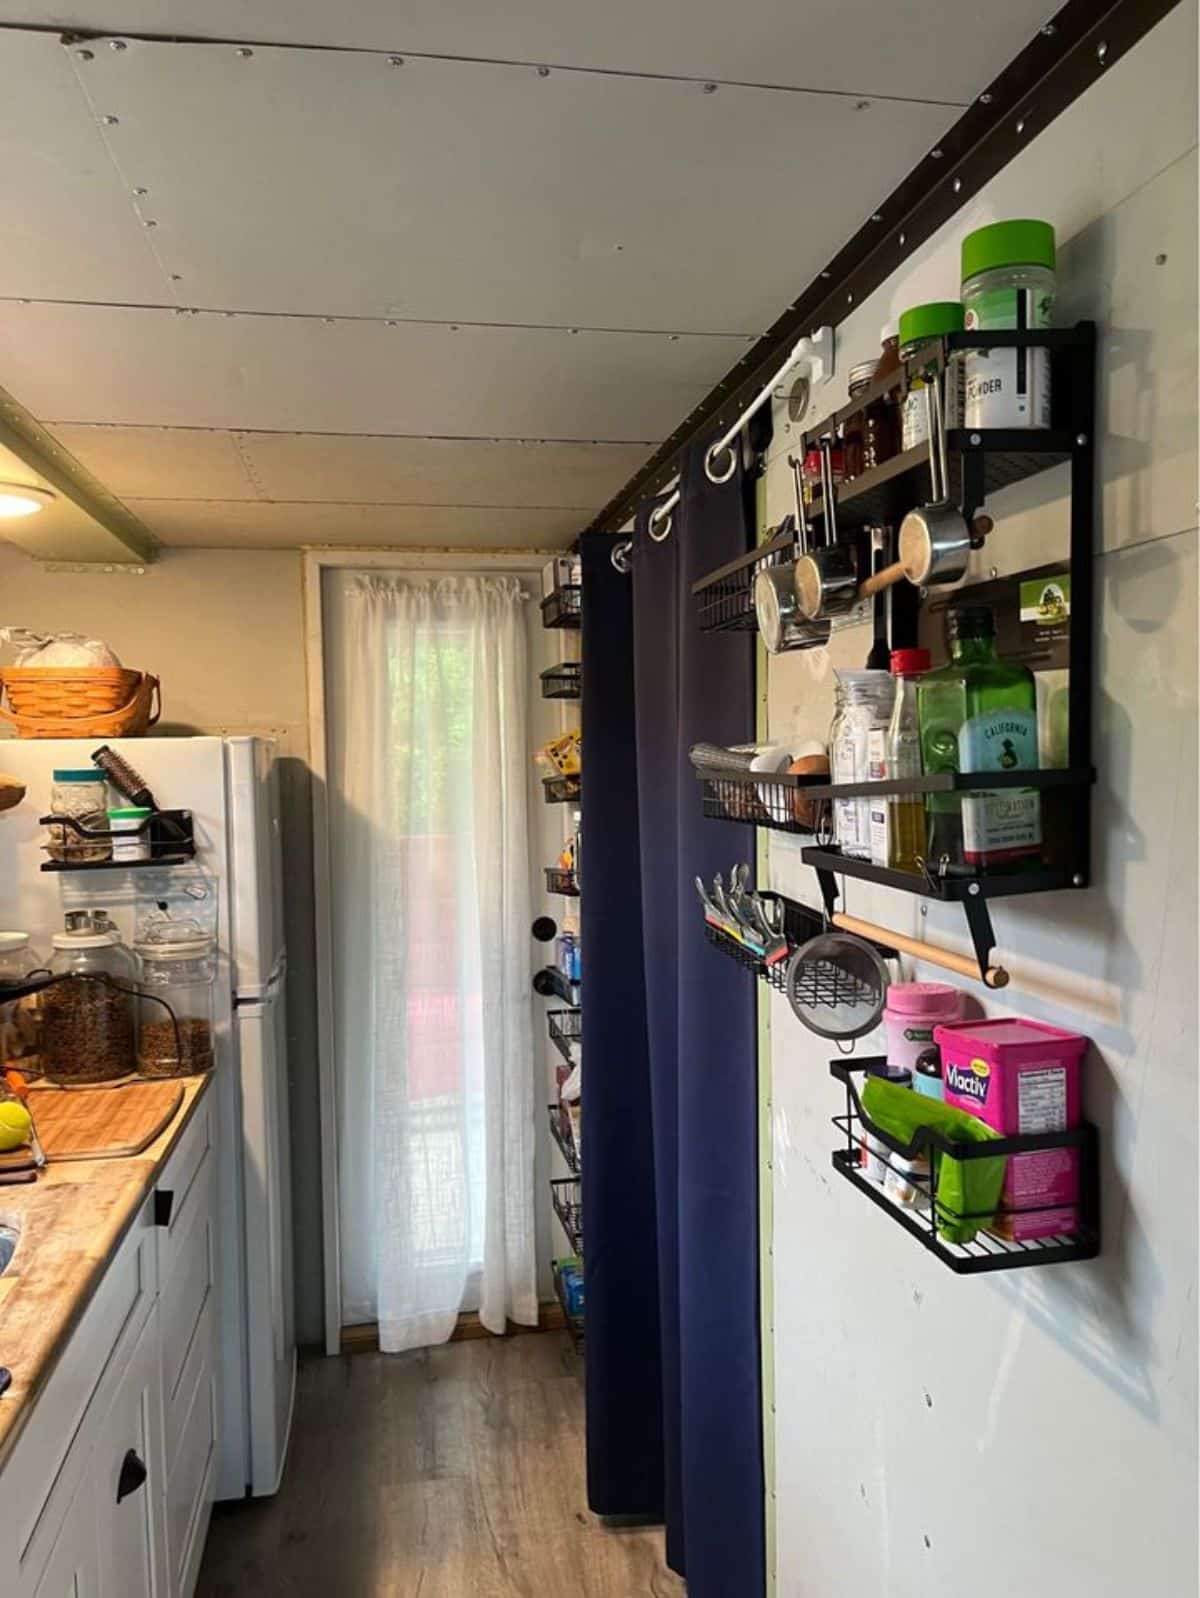 shelves opposite to the kitchen countertop has all the kitchen items